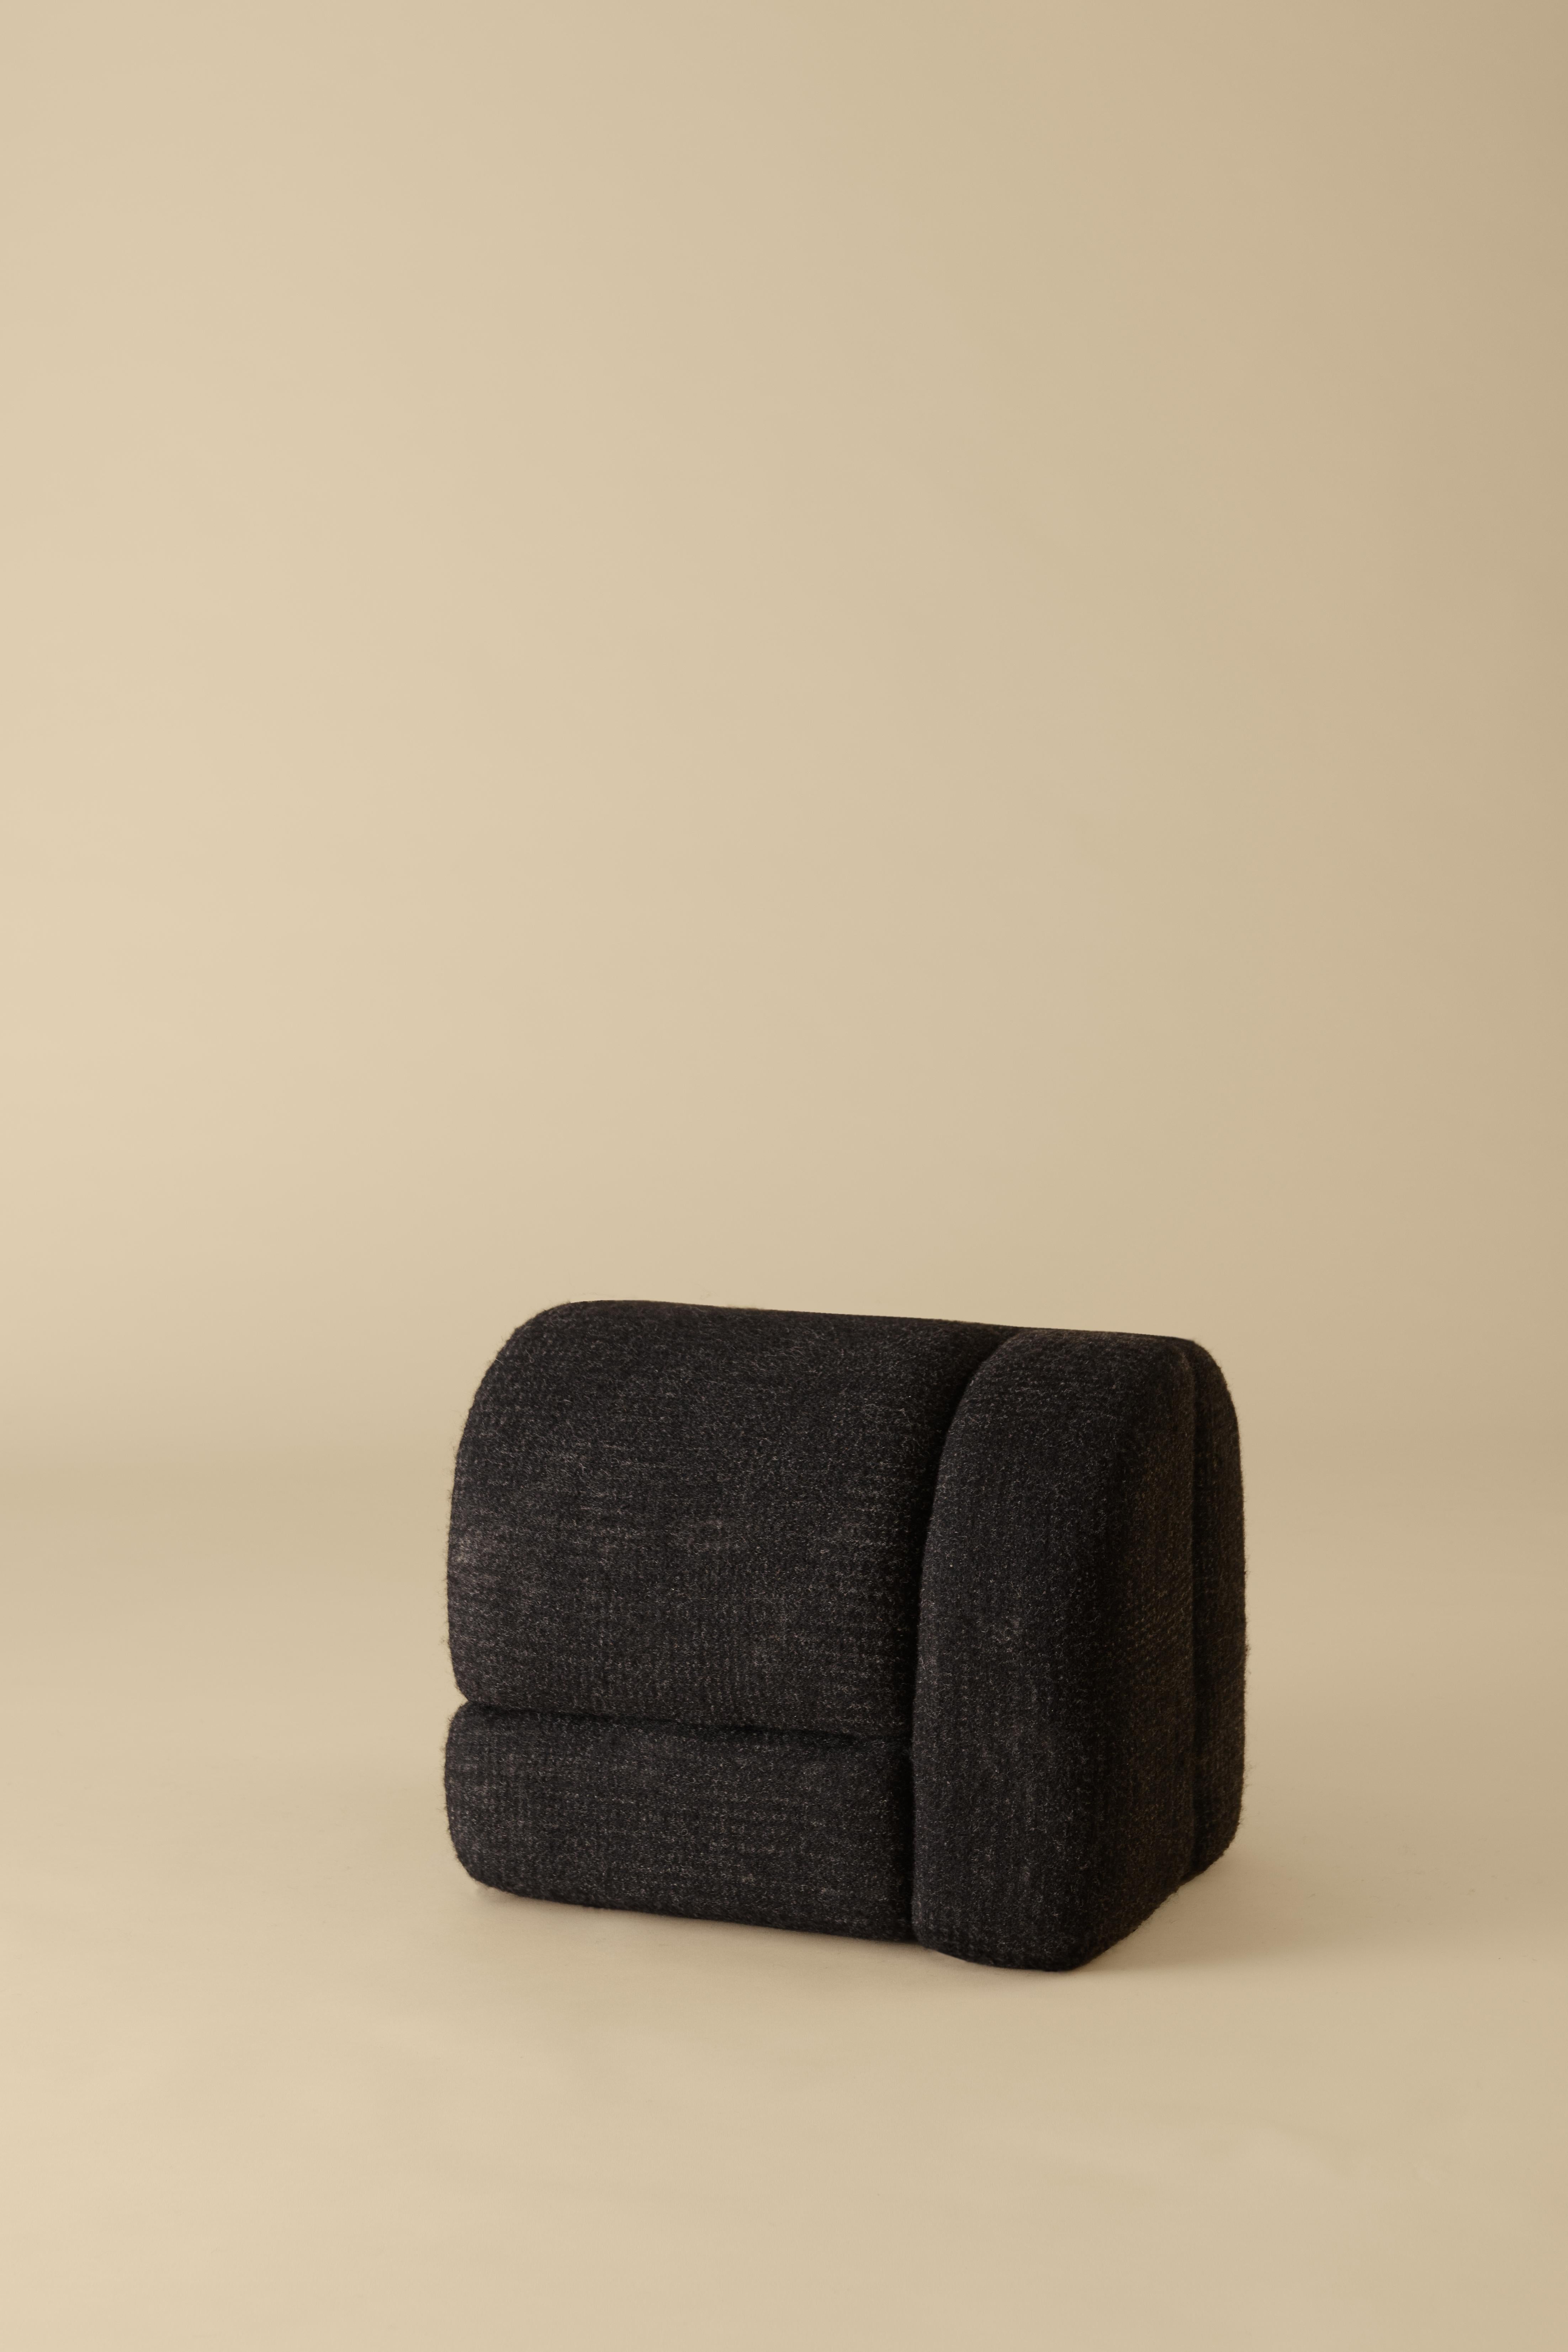 Sheep stool designed by Studio Ahead. The stool is upholstered in custom cream merino wool felt from Northern California sheep 
The stool could be placed on either side horizontally or vertically. Each side design is unique. Designed and fabricated